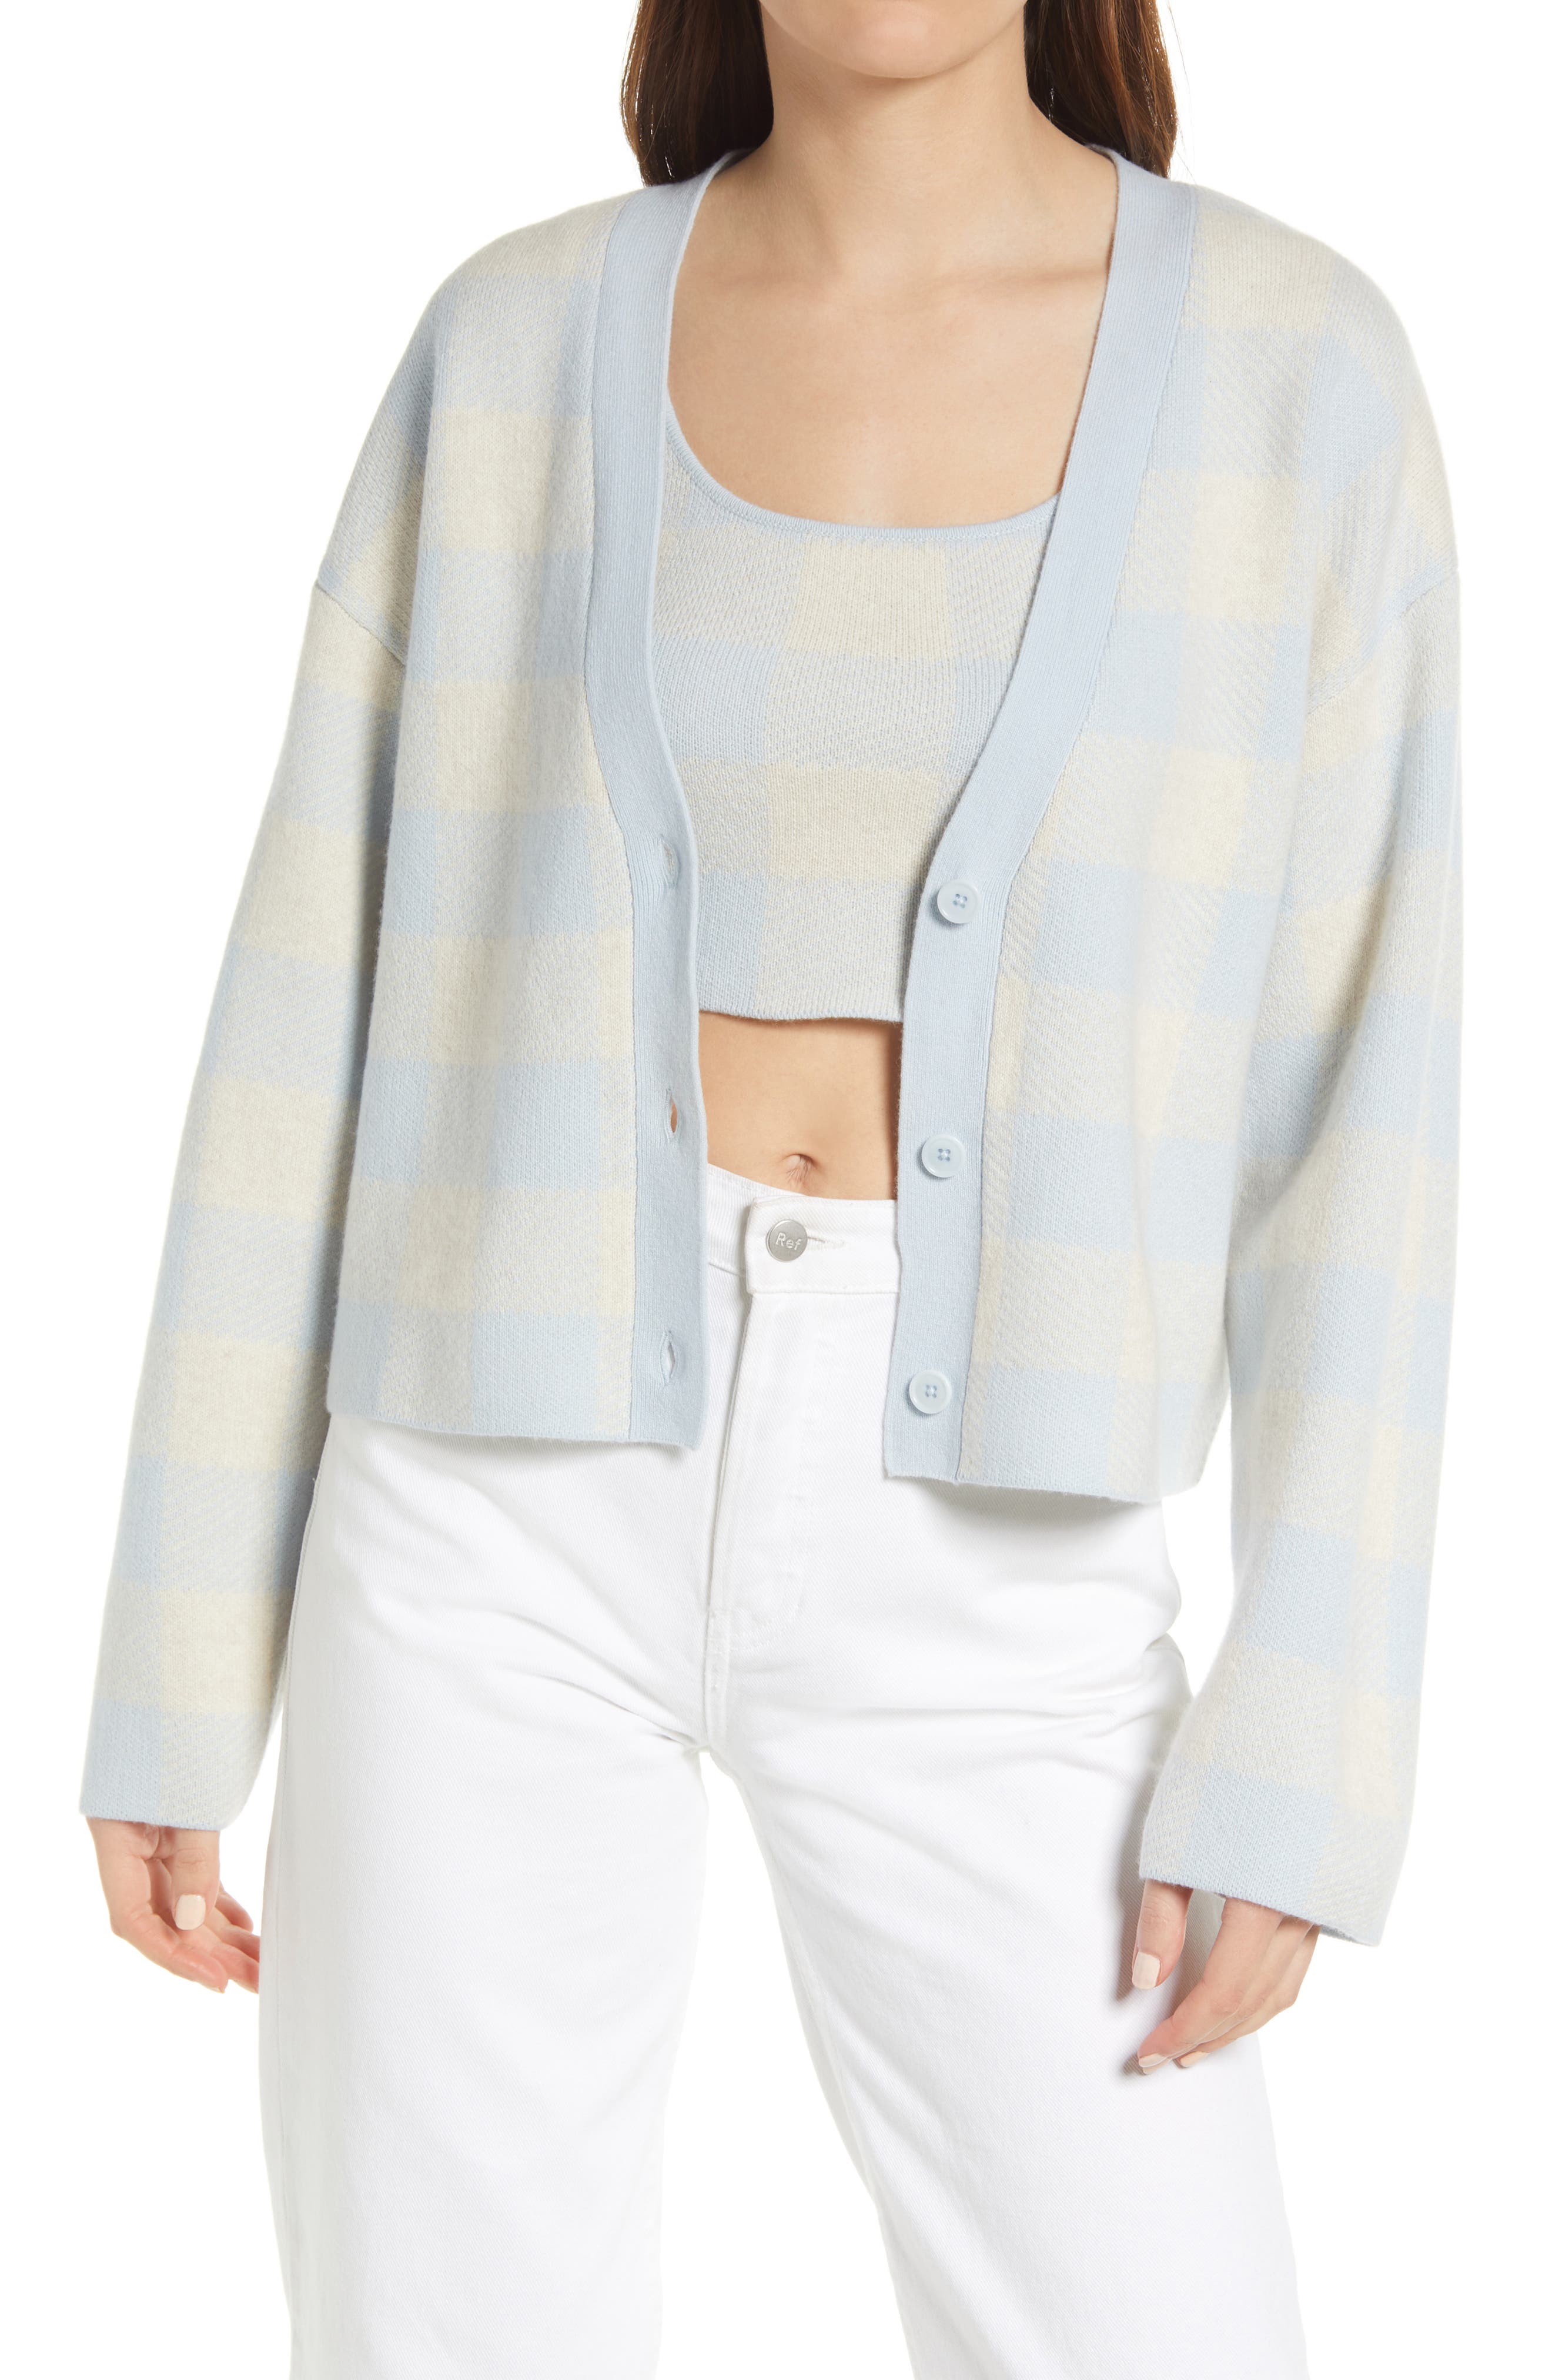 Reformation Fonte Plaid Cashmere Tank & Cardigan Set in Gossamer/Powder Blue Check at Nordstrom, Size X-Small